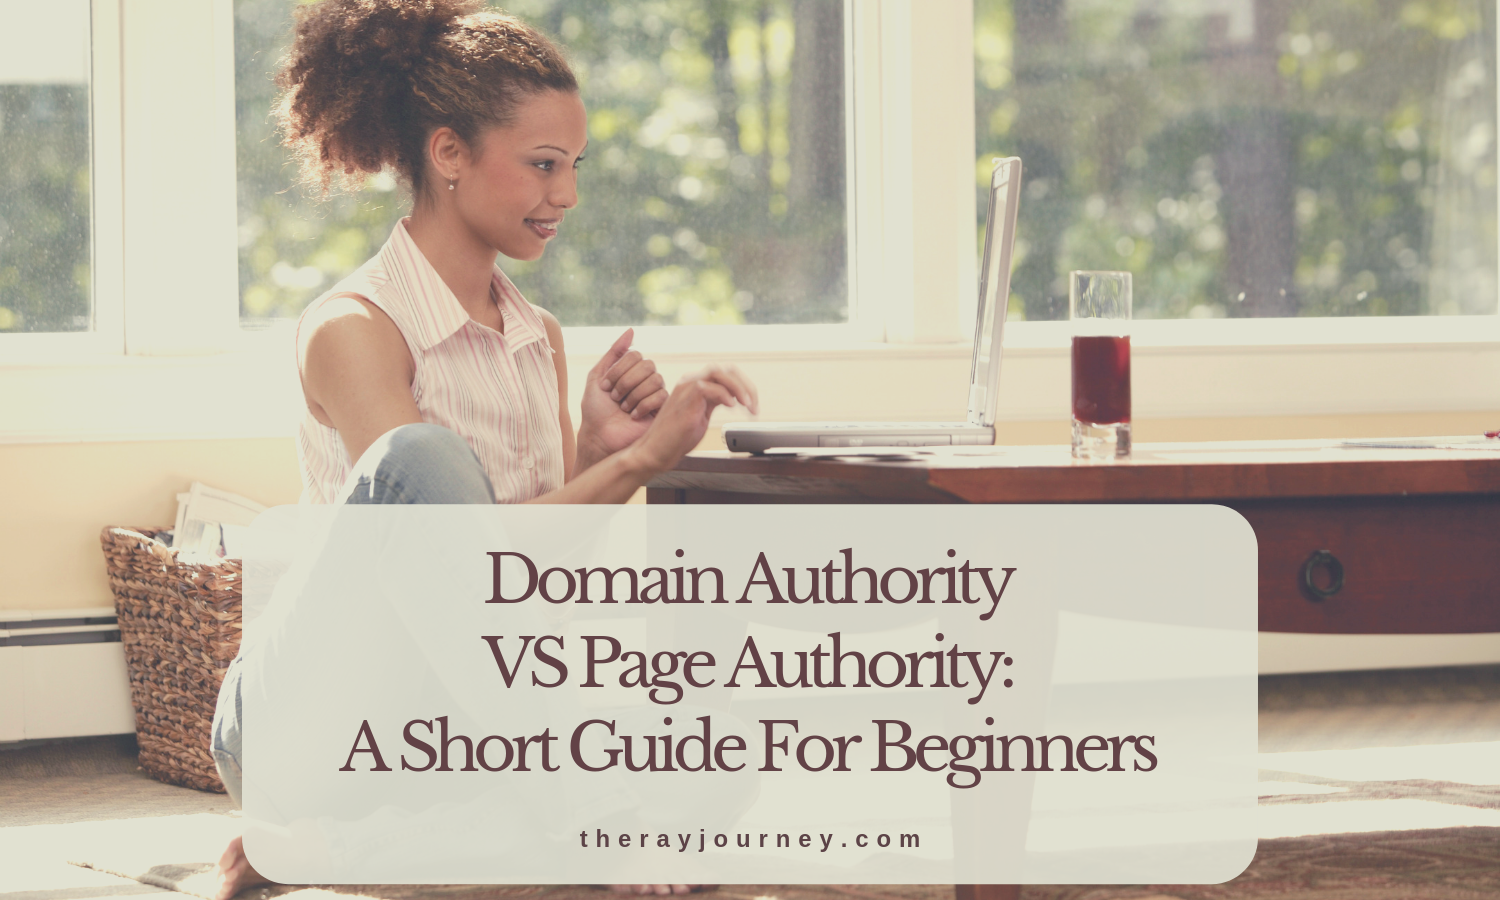 Domain Authority VS Page Authority: A Short Guide For Beginners